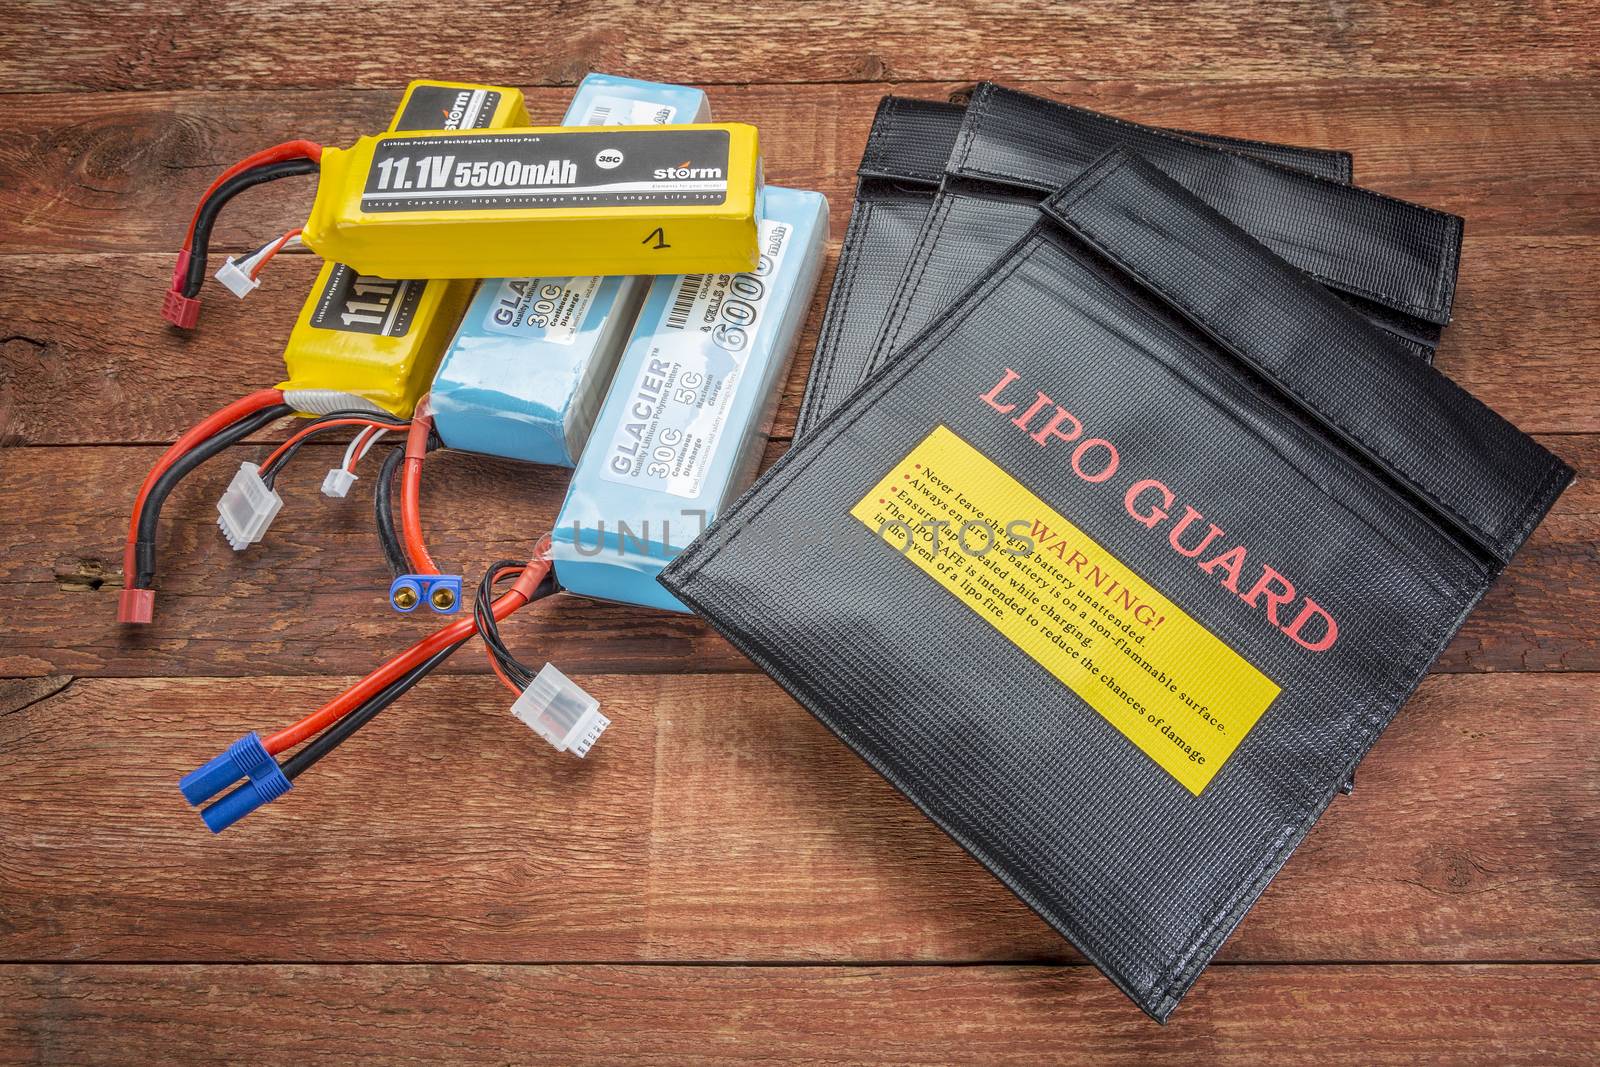 LiPO batteries and protective charging bags by PixelsAway